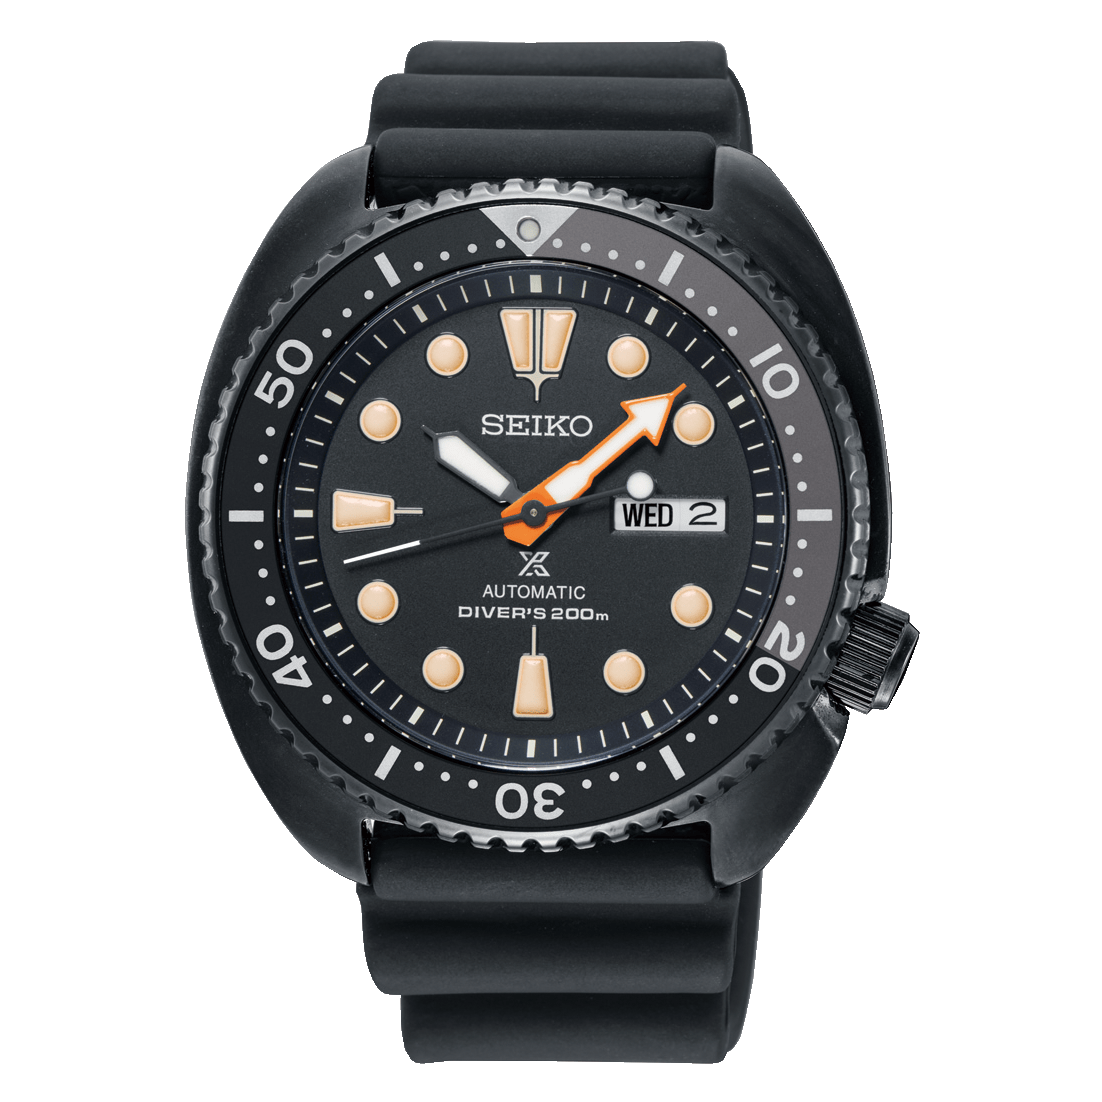 Fun Watches (and Machines) For The Halloween Weekend